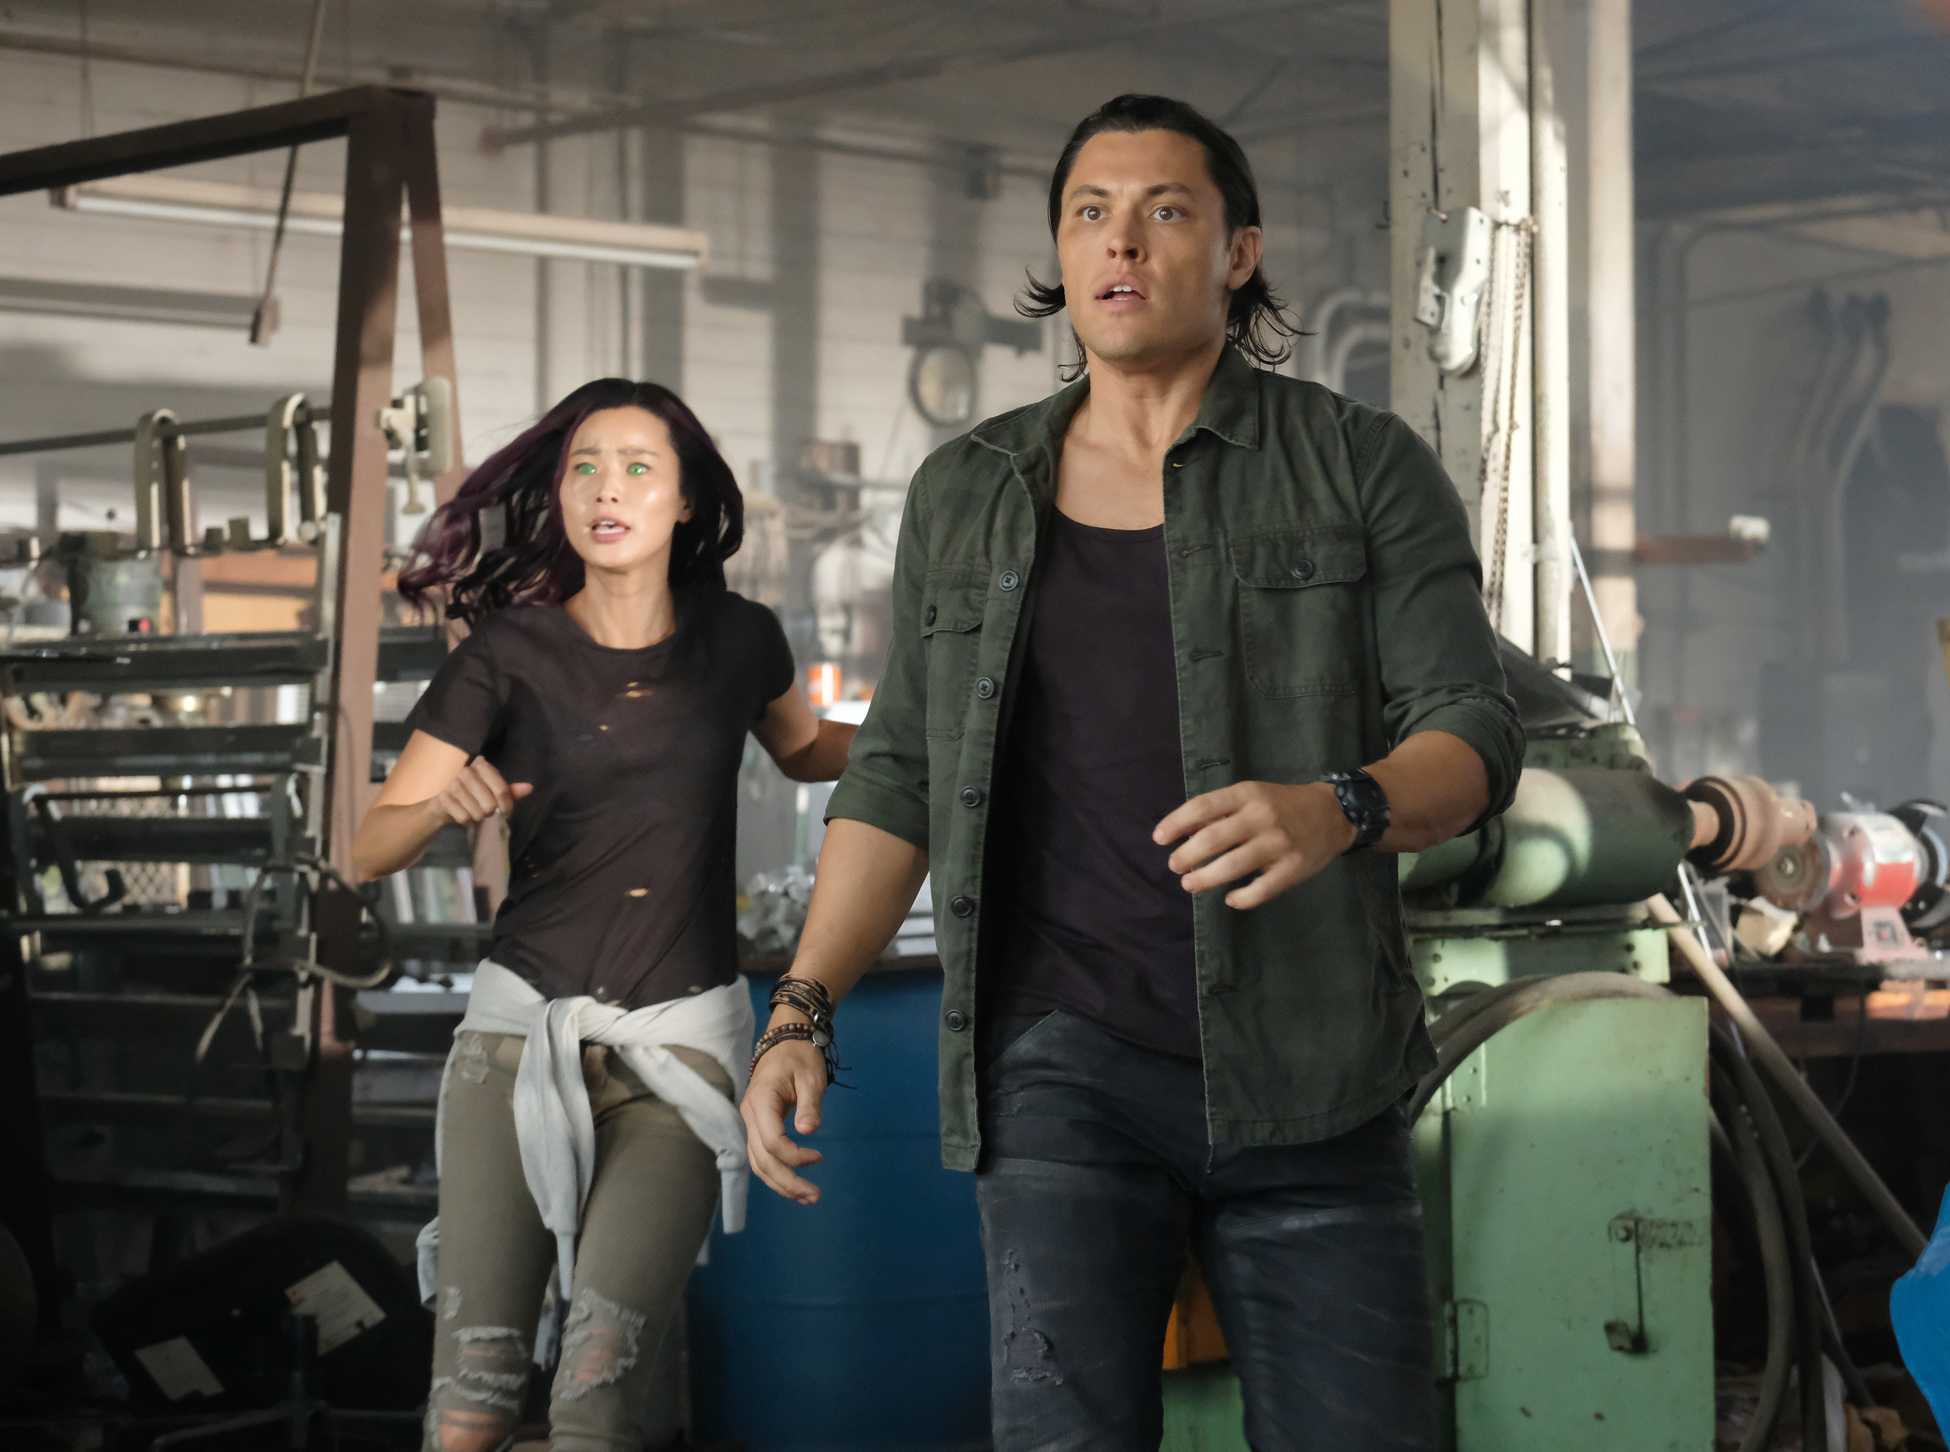 THE GIFTED: Jamie Chung and Blair Redford in the "eXit strategy" episode of THE GIFTED airing Monday, Oct. 23 (9:00-10:00 PM ET/PT) on FOX. ©2017 Fox Broadcasting Co. Cr: Eliza Morse/FOX